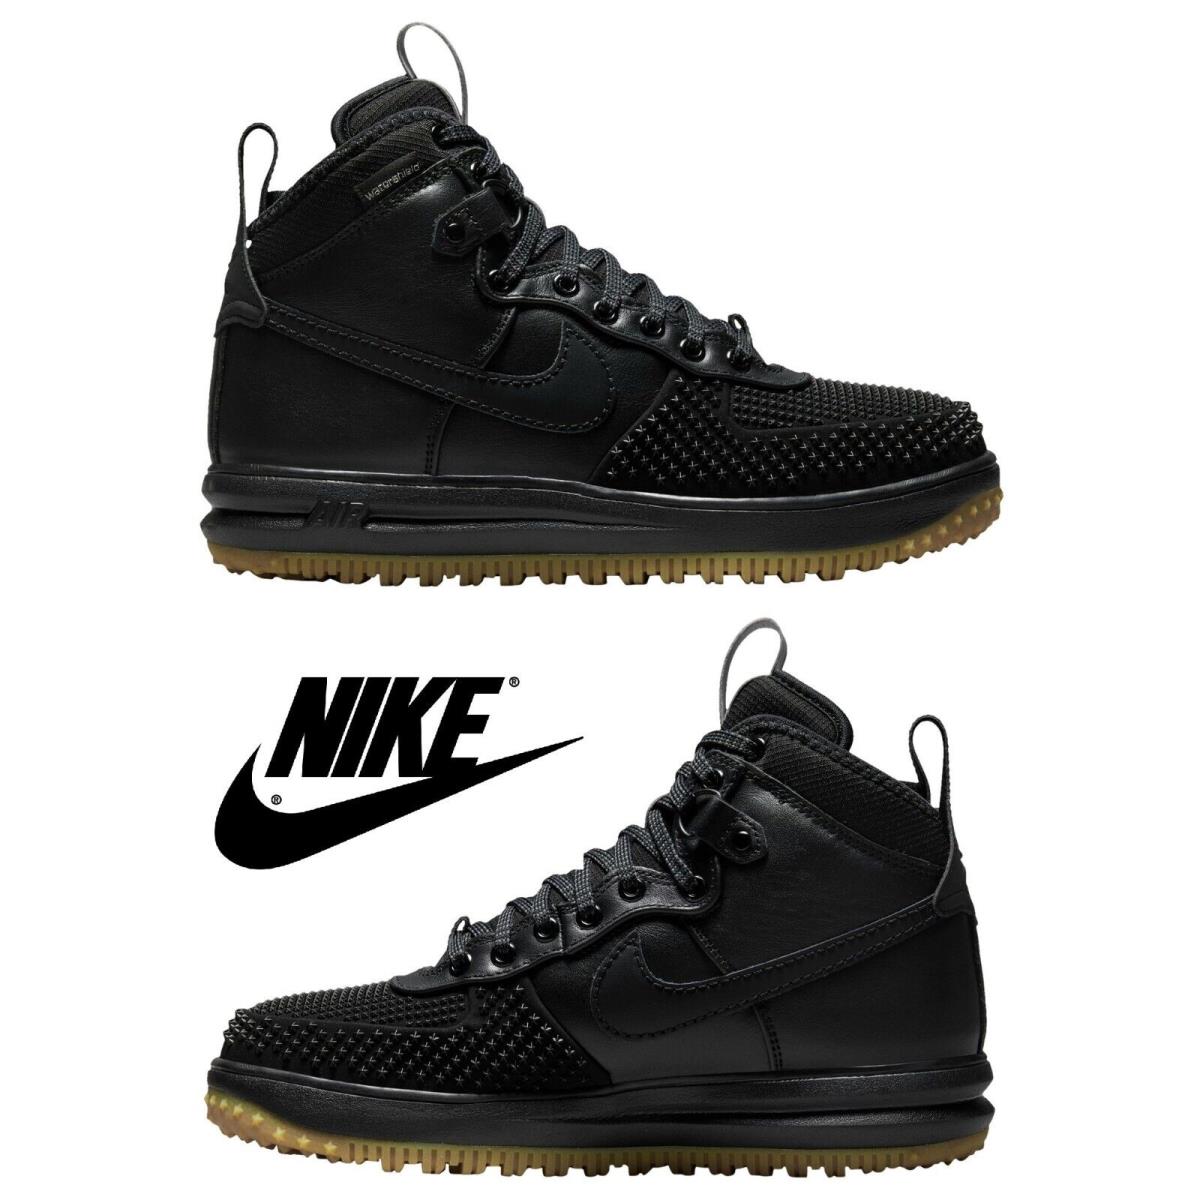 Nike Lunar Force 1 Duckboot Men`s Boots Hiking Water-resistant Leather Shoes - Black, Manufacturer: Black/Metallic Silver/Anthracite